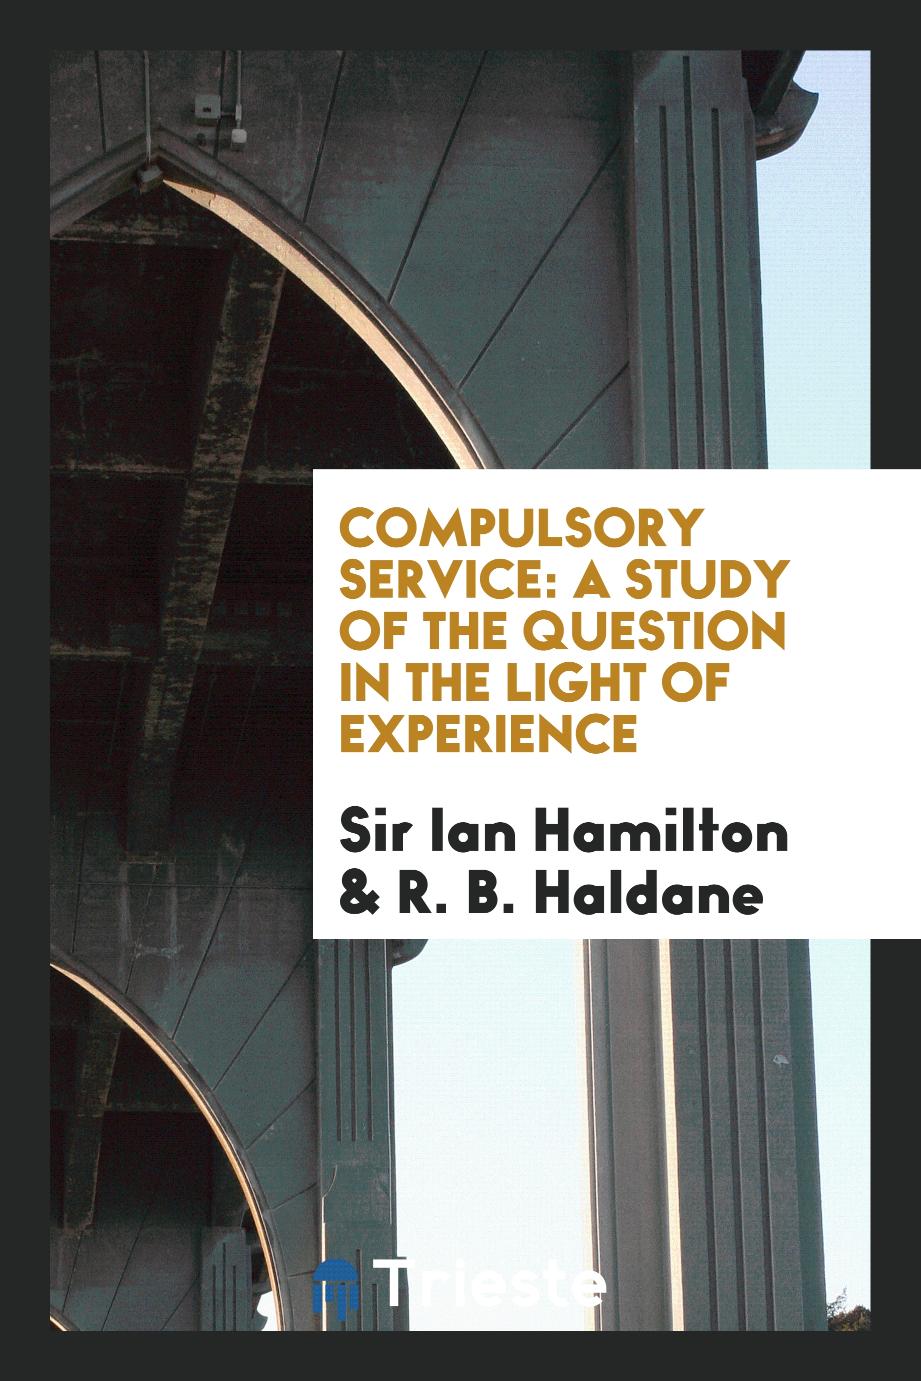 Compulsory service: a study of the question in the light of experience